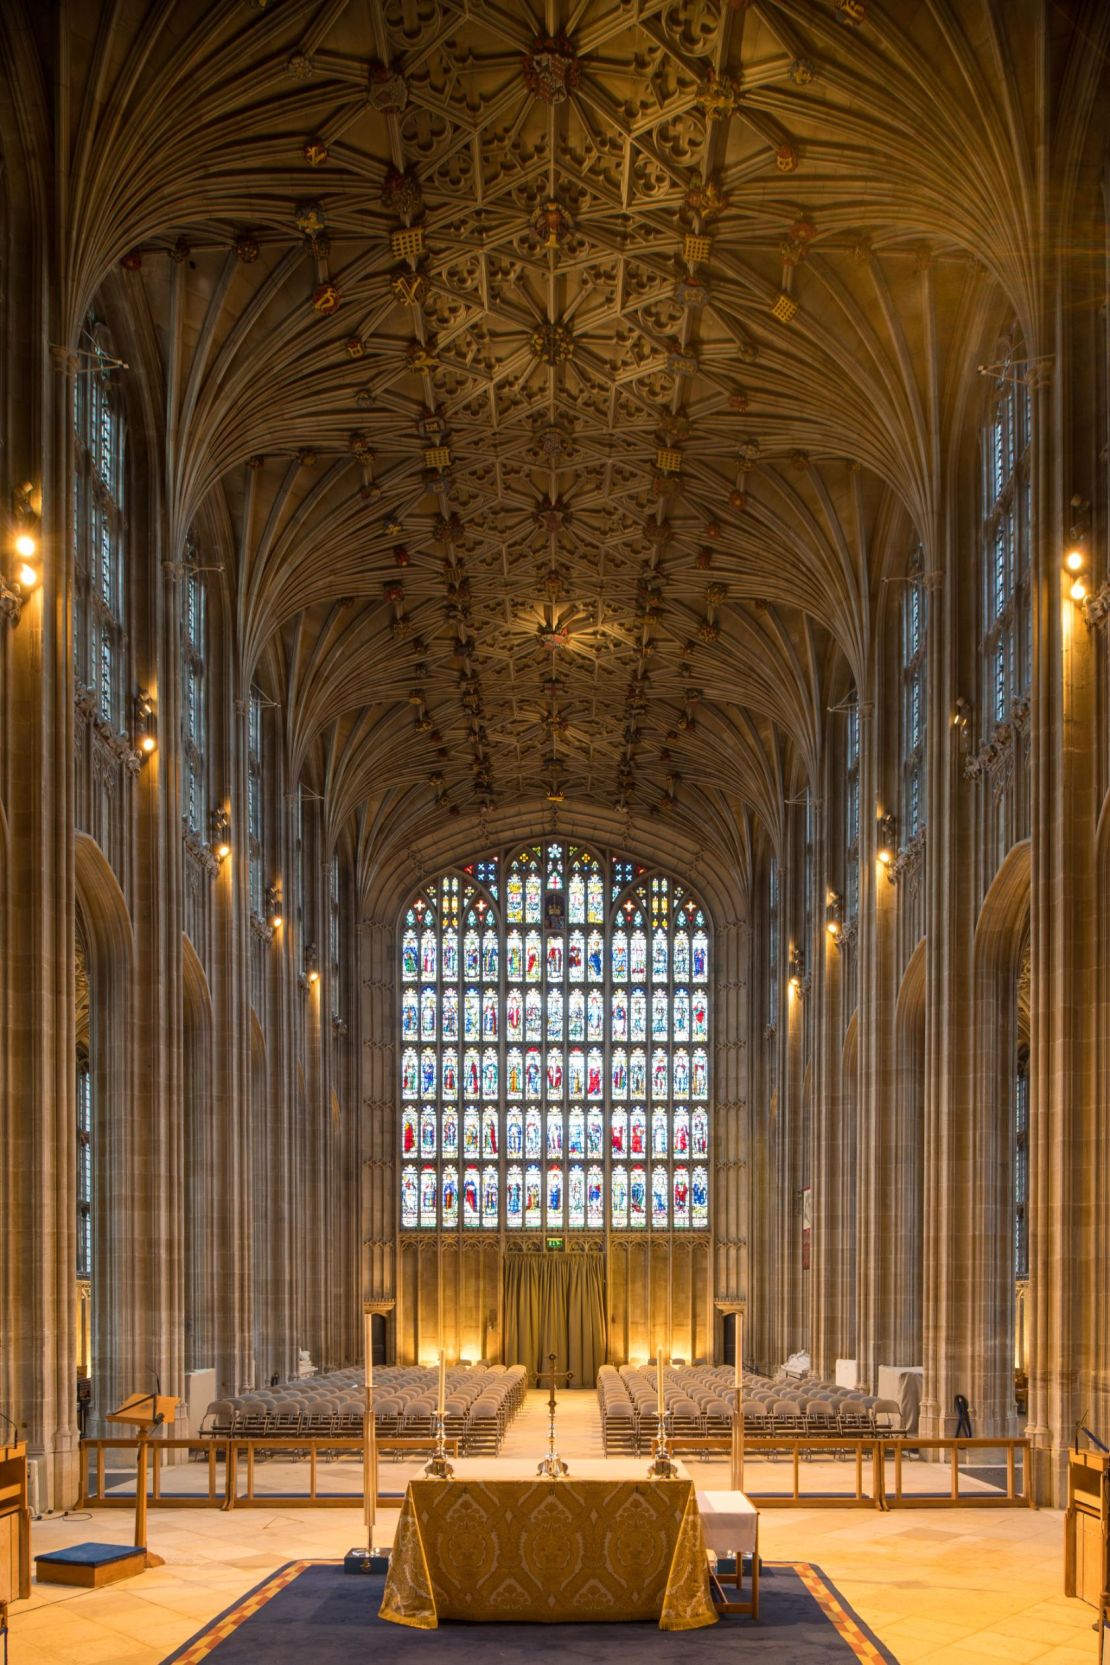 St George's Chapel is decorated with elaborate stained glass from both the Victorian and medieval periods. 